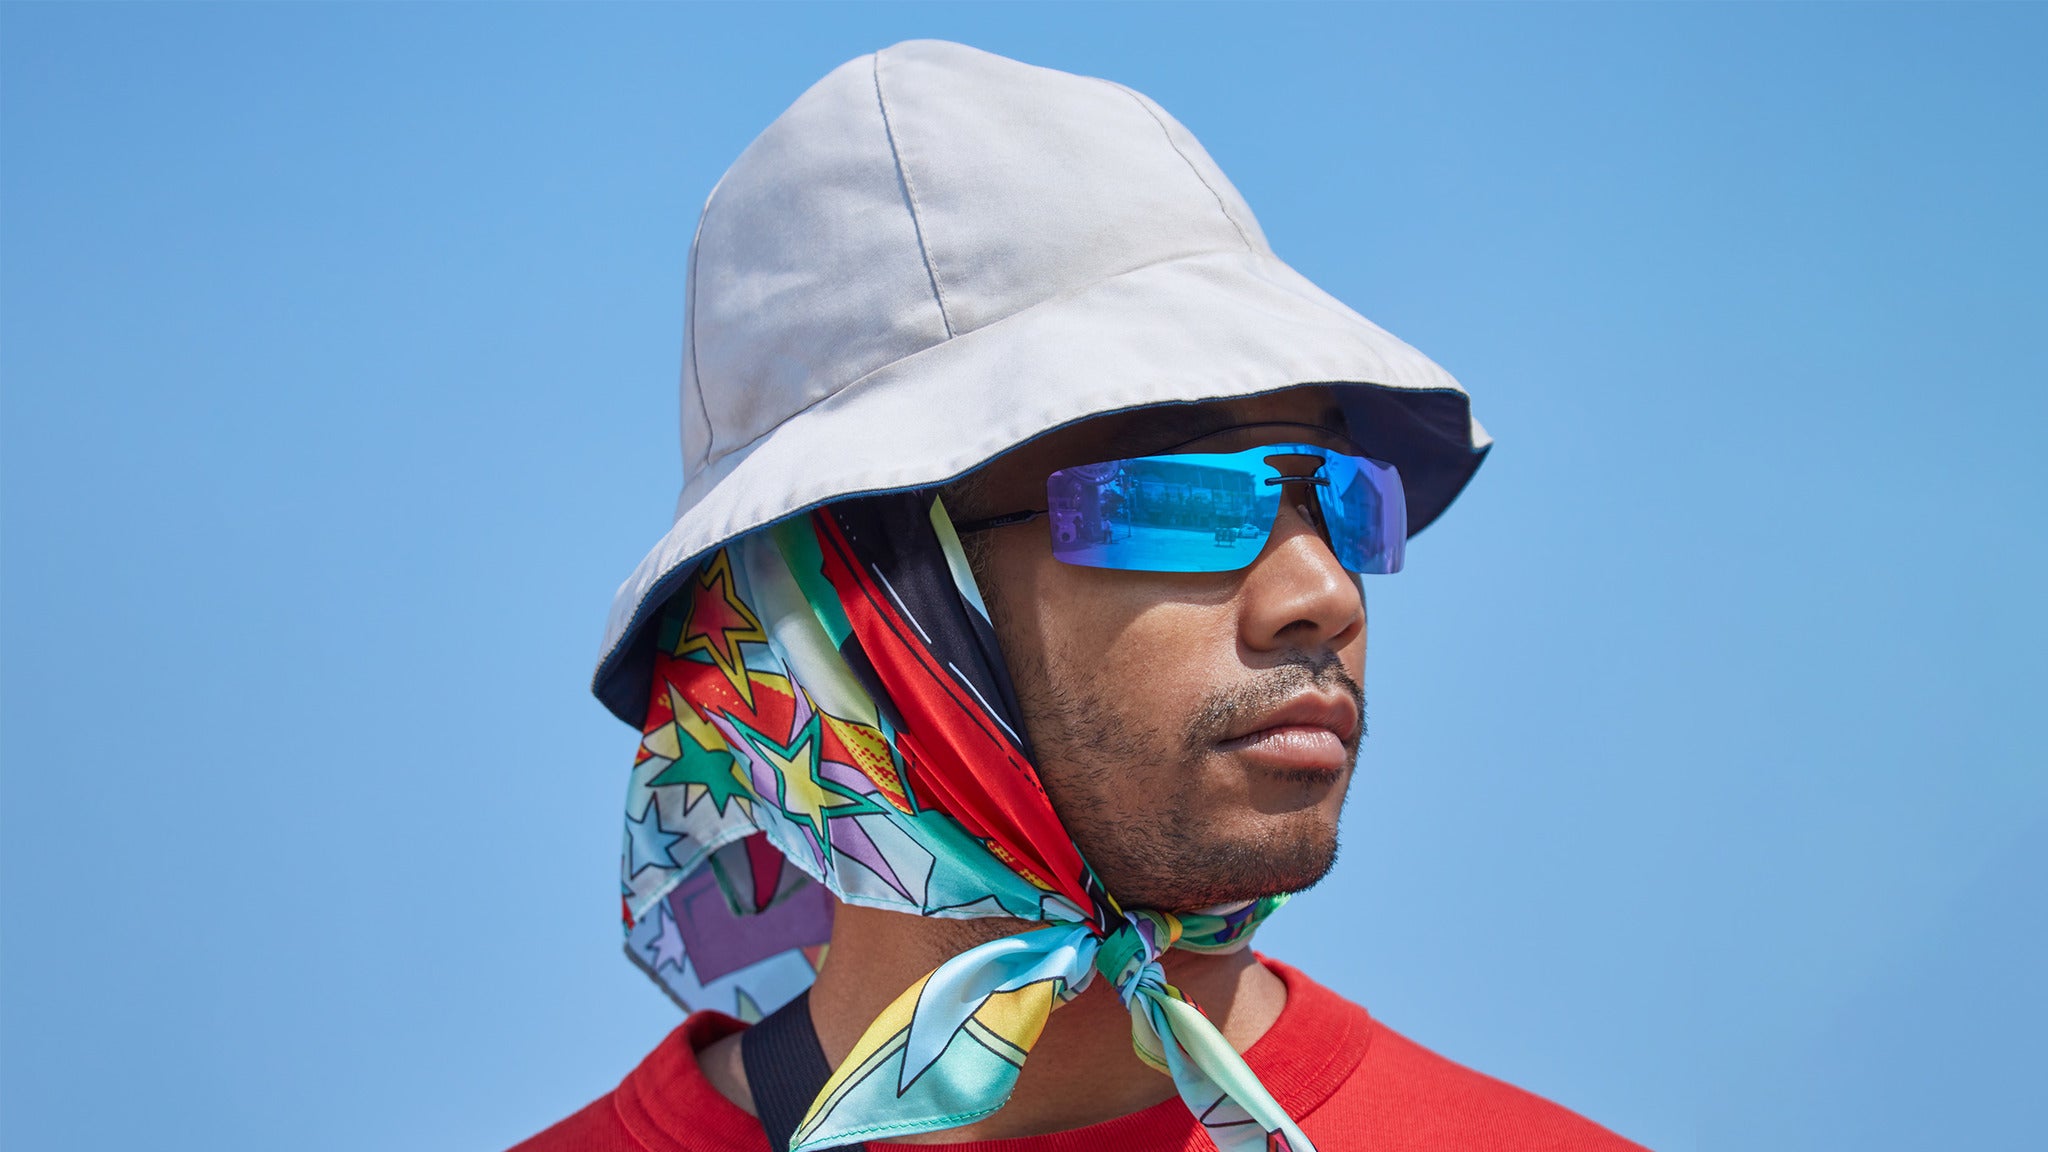 Toro y Moi in Hollywood promo photo for Citi® Cardmember presale offer code